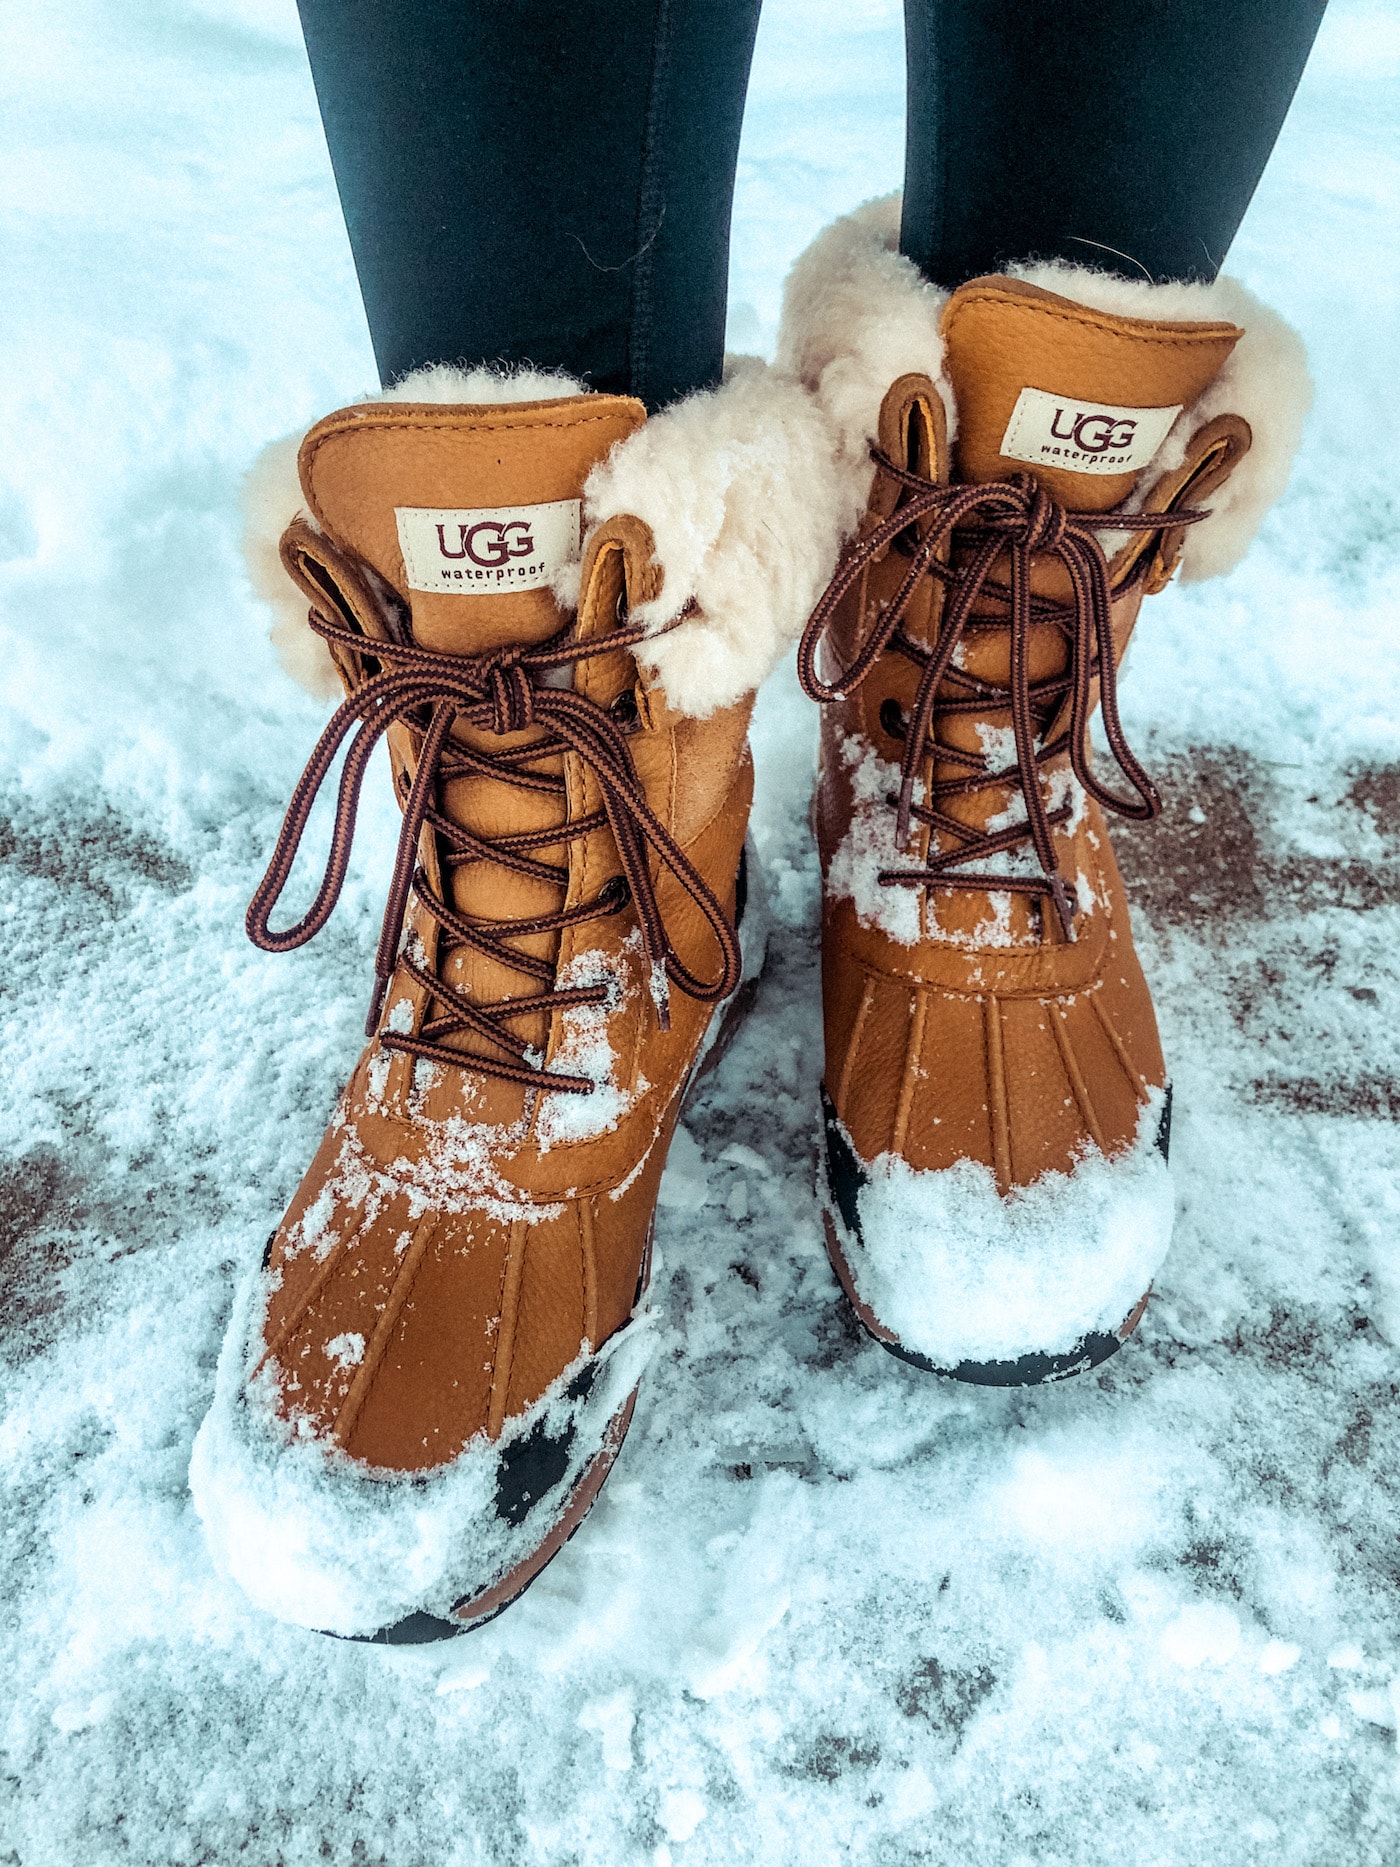 The Best Snow Boots for Winter - UGG adirondack iii boot